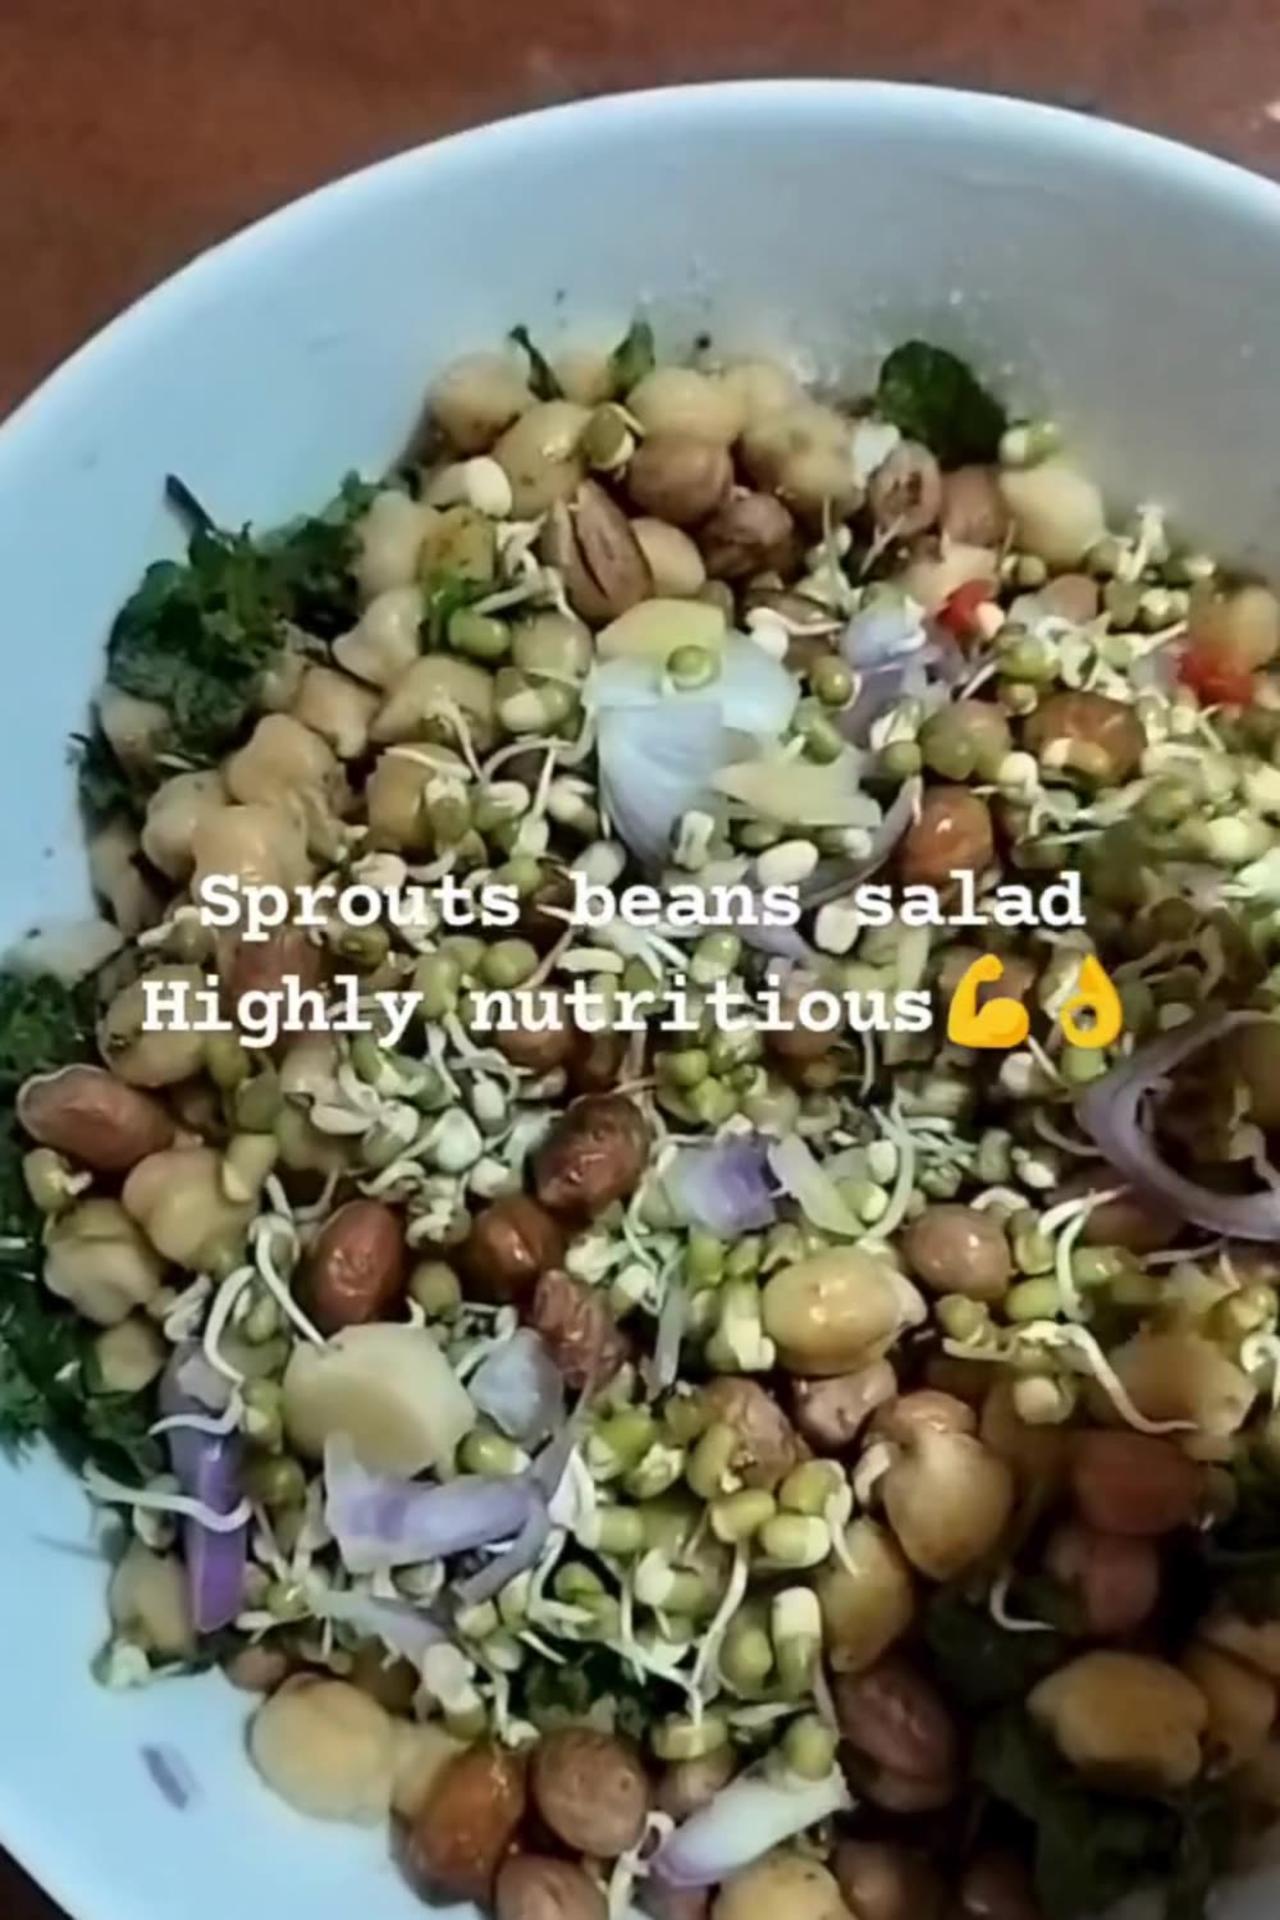 🌱 Boost Your Health with Sprouts Bean Salad Recipe! Nutritious Delight 🥗 #HealthyRecipes #Superfood